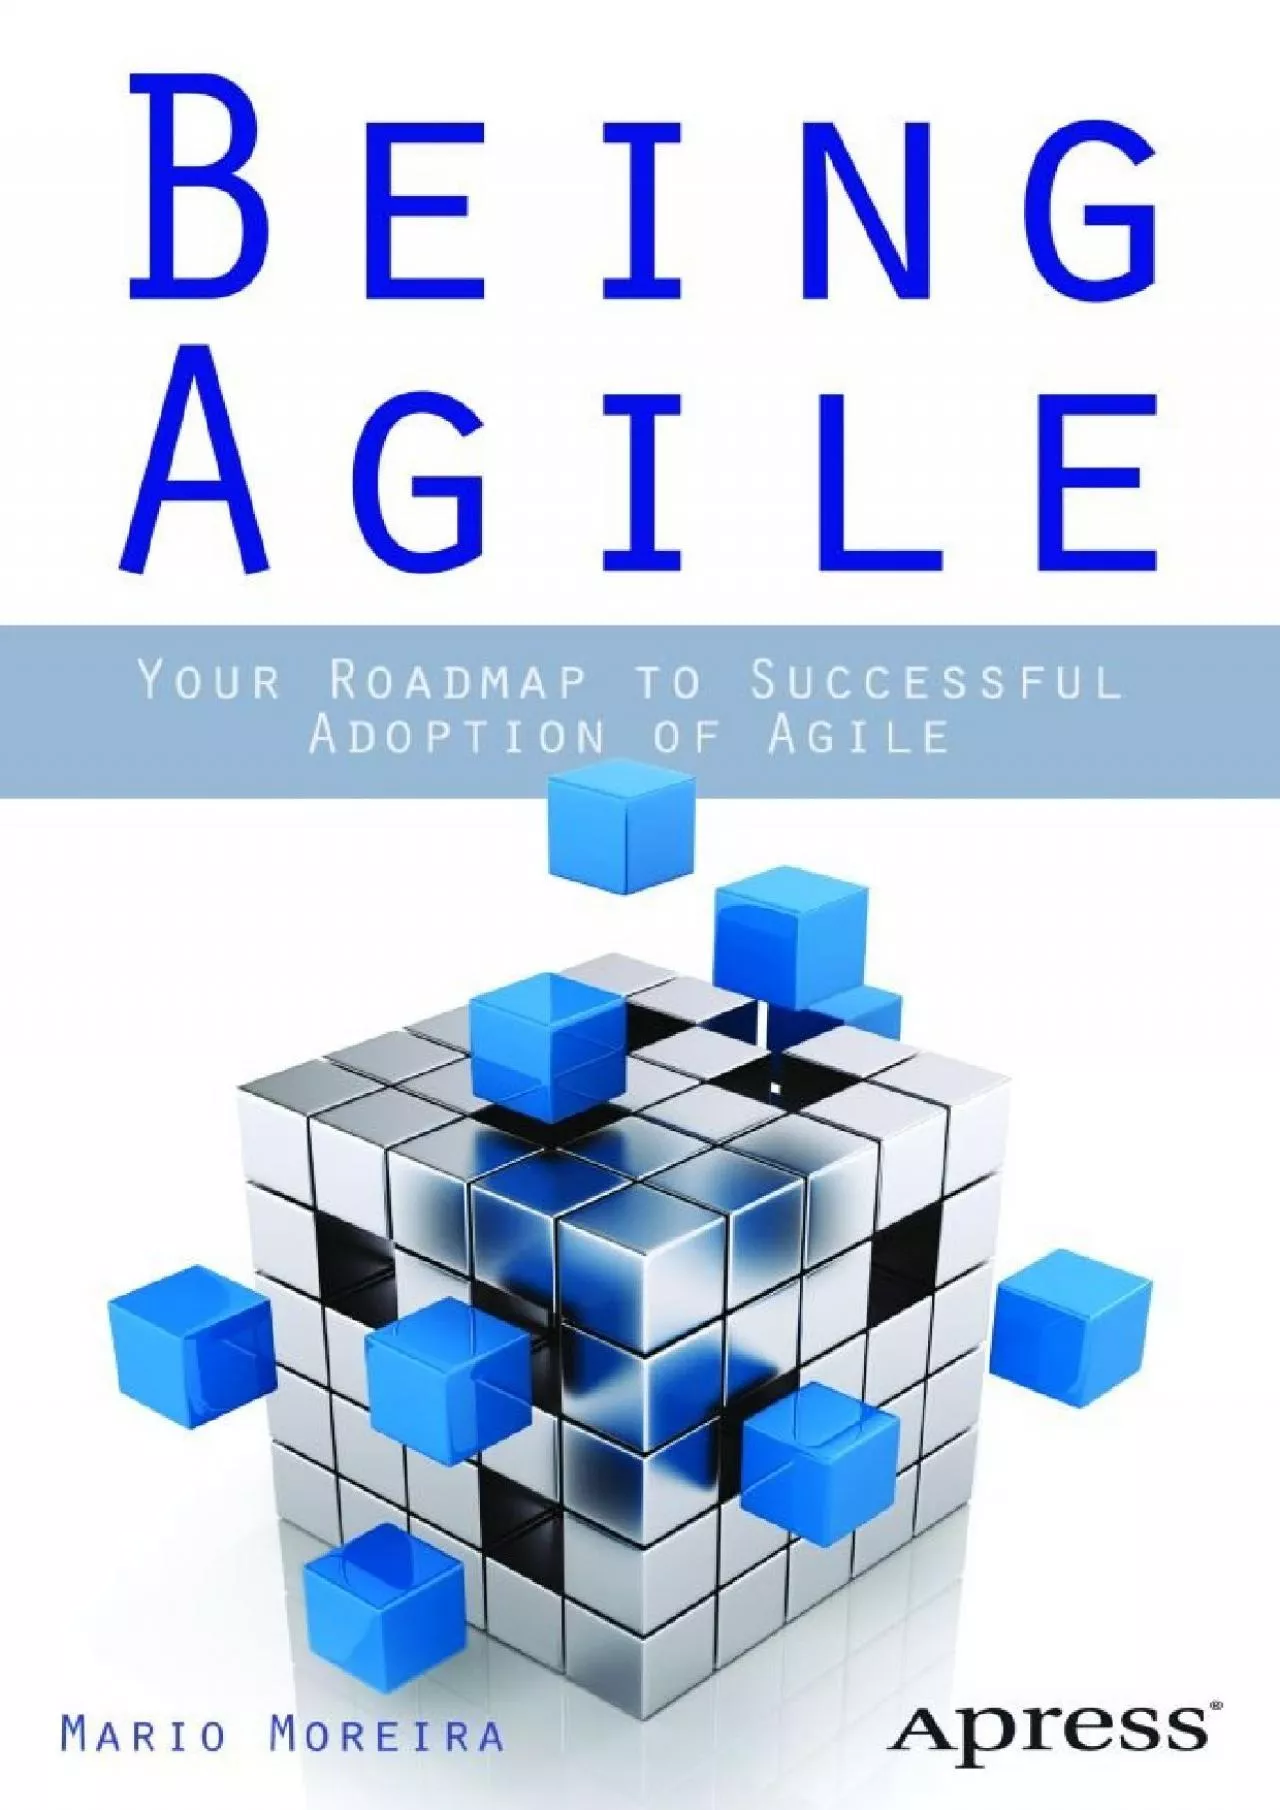 [DOWLOAD]-Being Agile: Your Roadmap to Successful Adoption of Agile